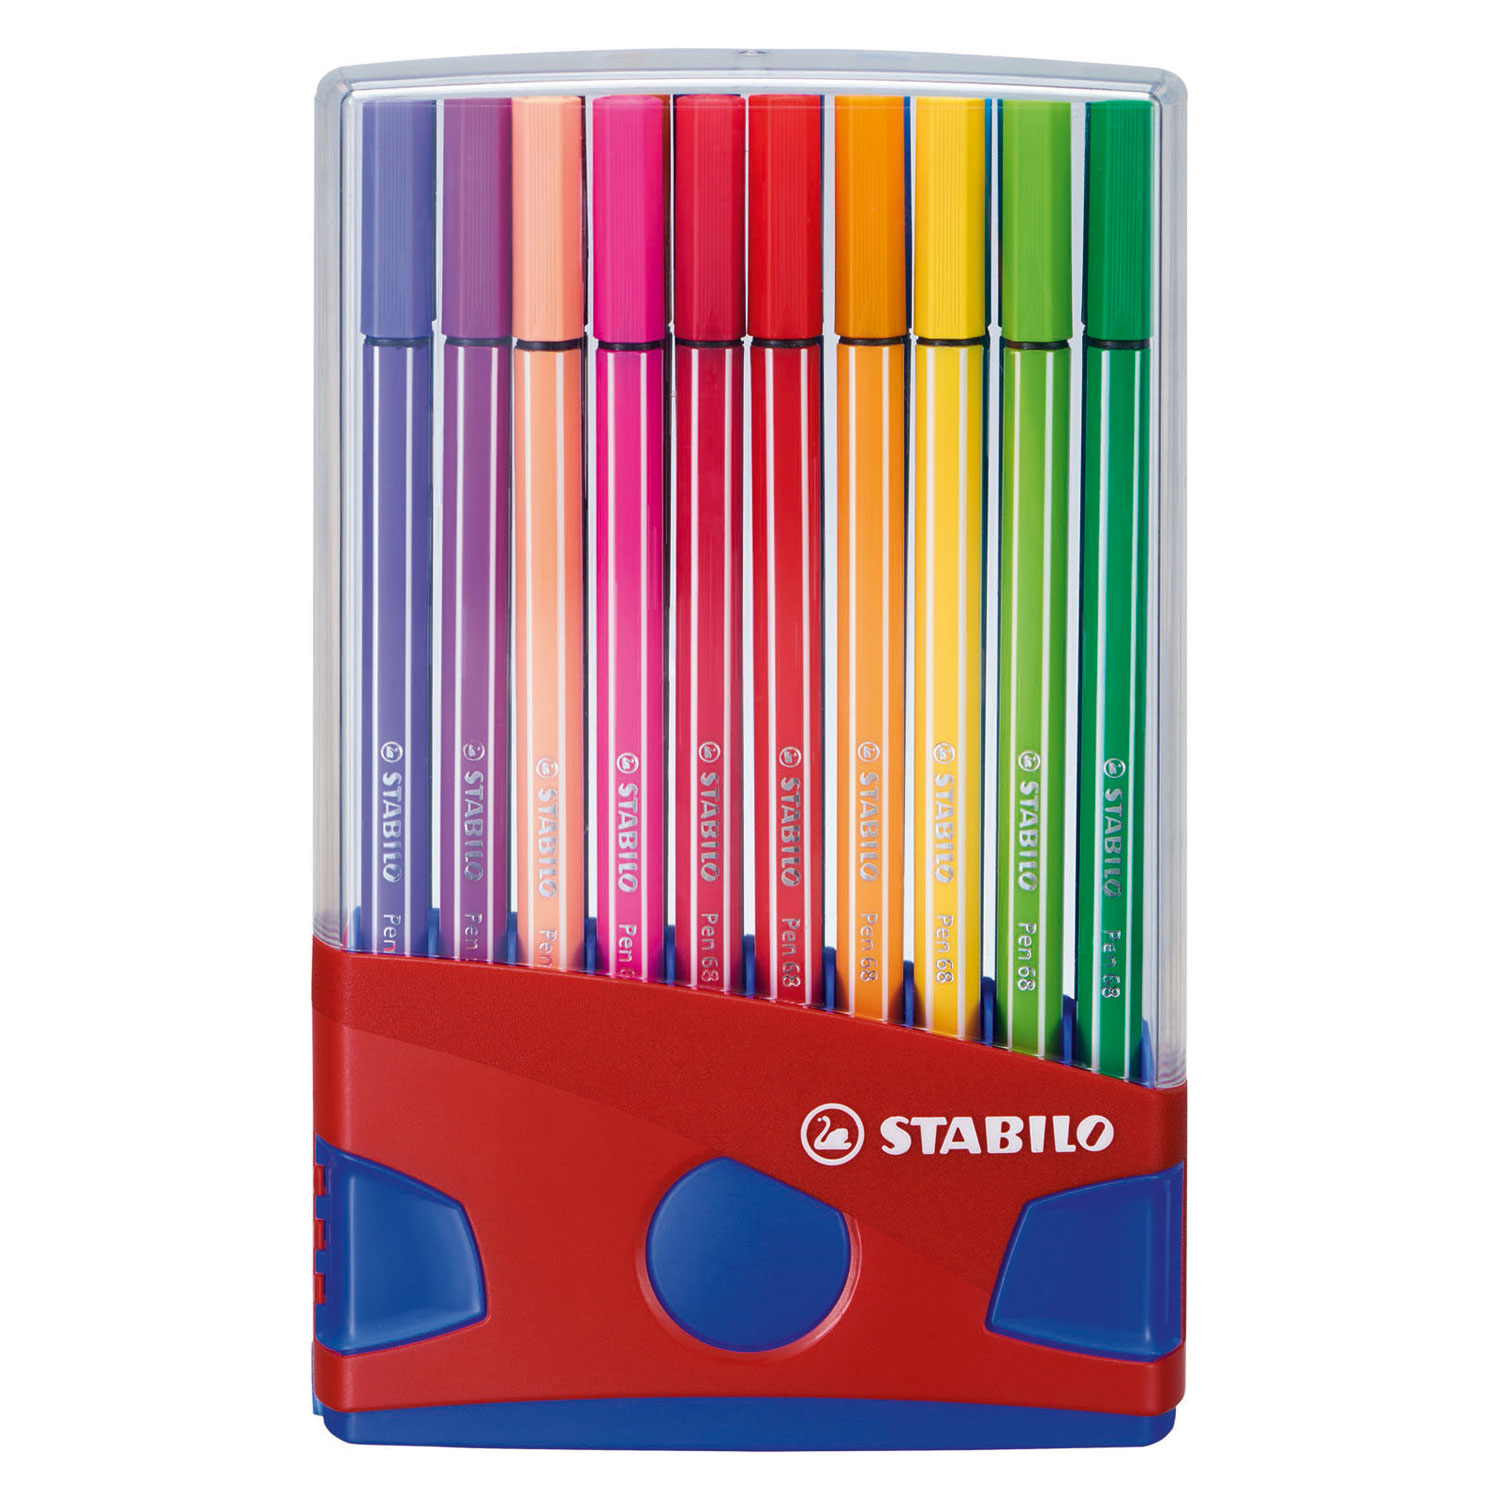 STABILO Pen 68 Colorparade Rood, 20st.